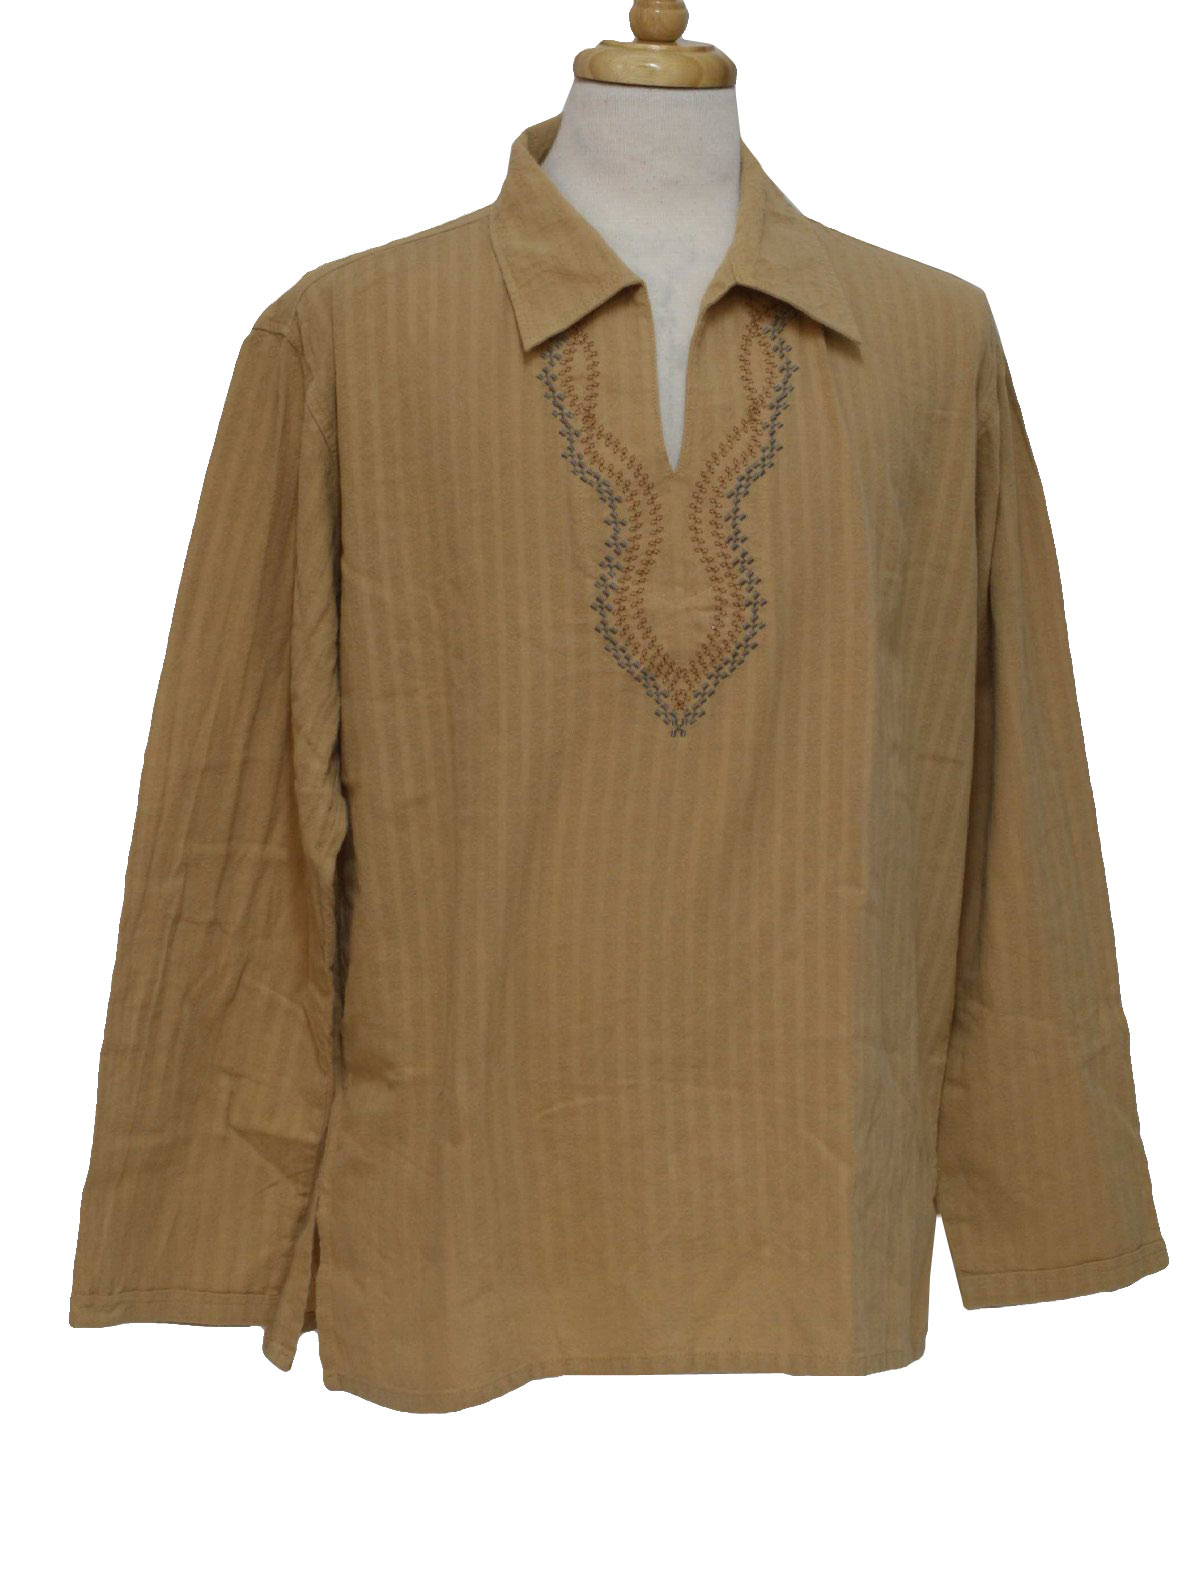 1970s Hippie Shirt: 70s -no label- Mens golden-tan, silver-grey and ...